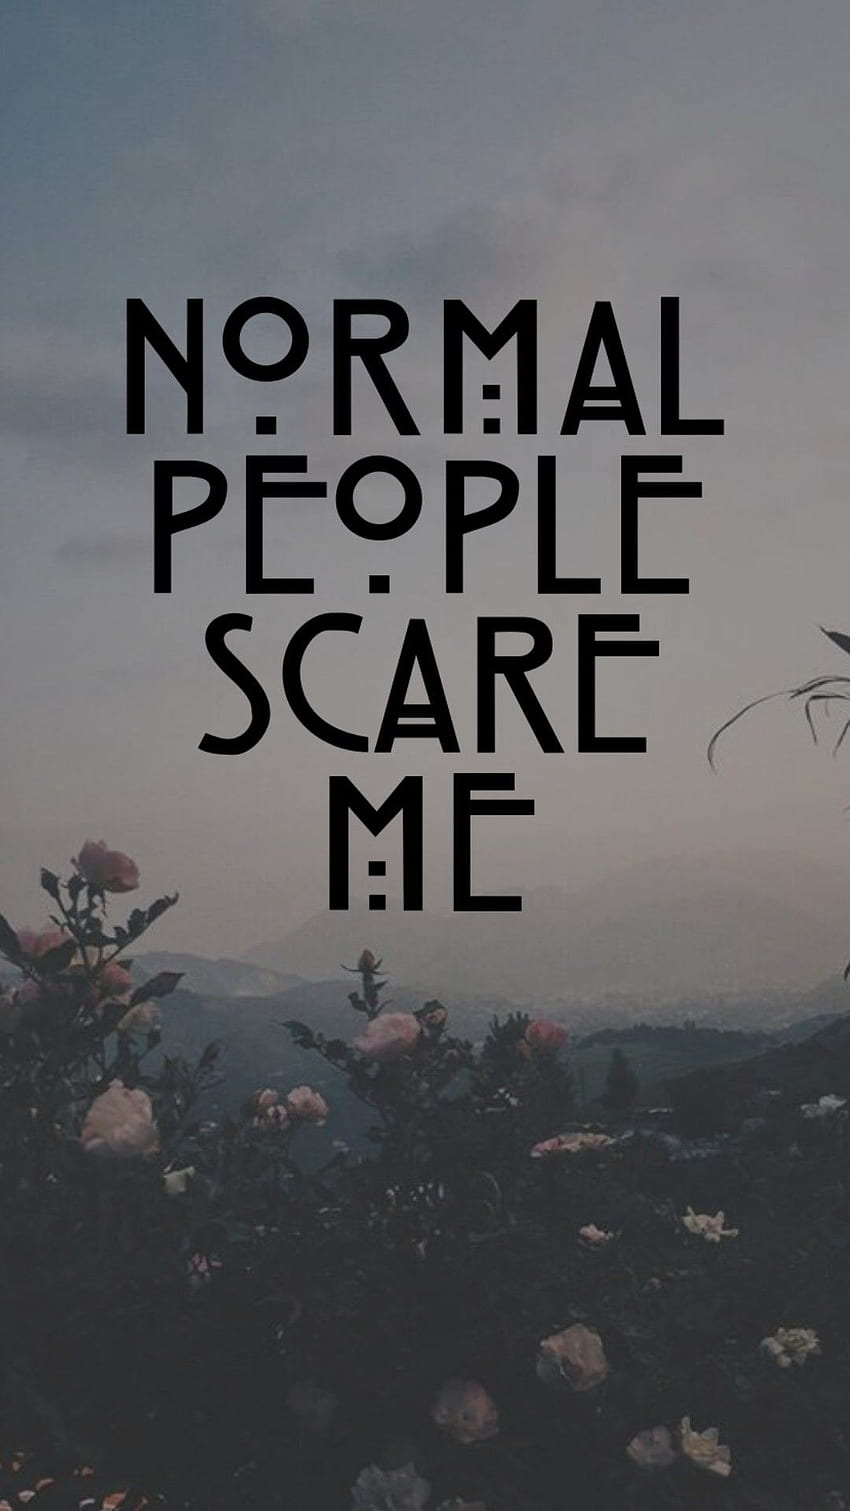 Aesthetic Normal People Scare Me - & Background HD phone wallpaper